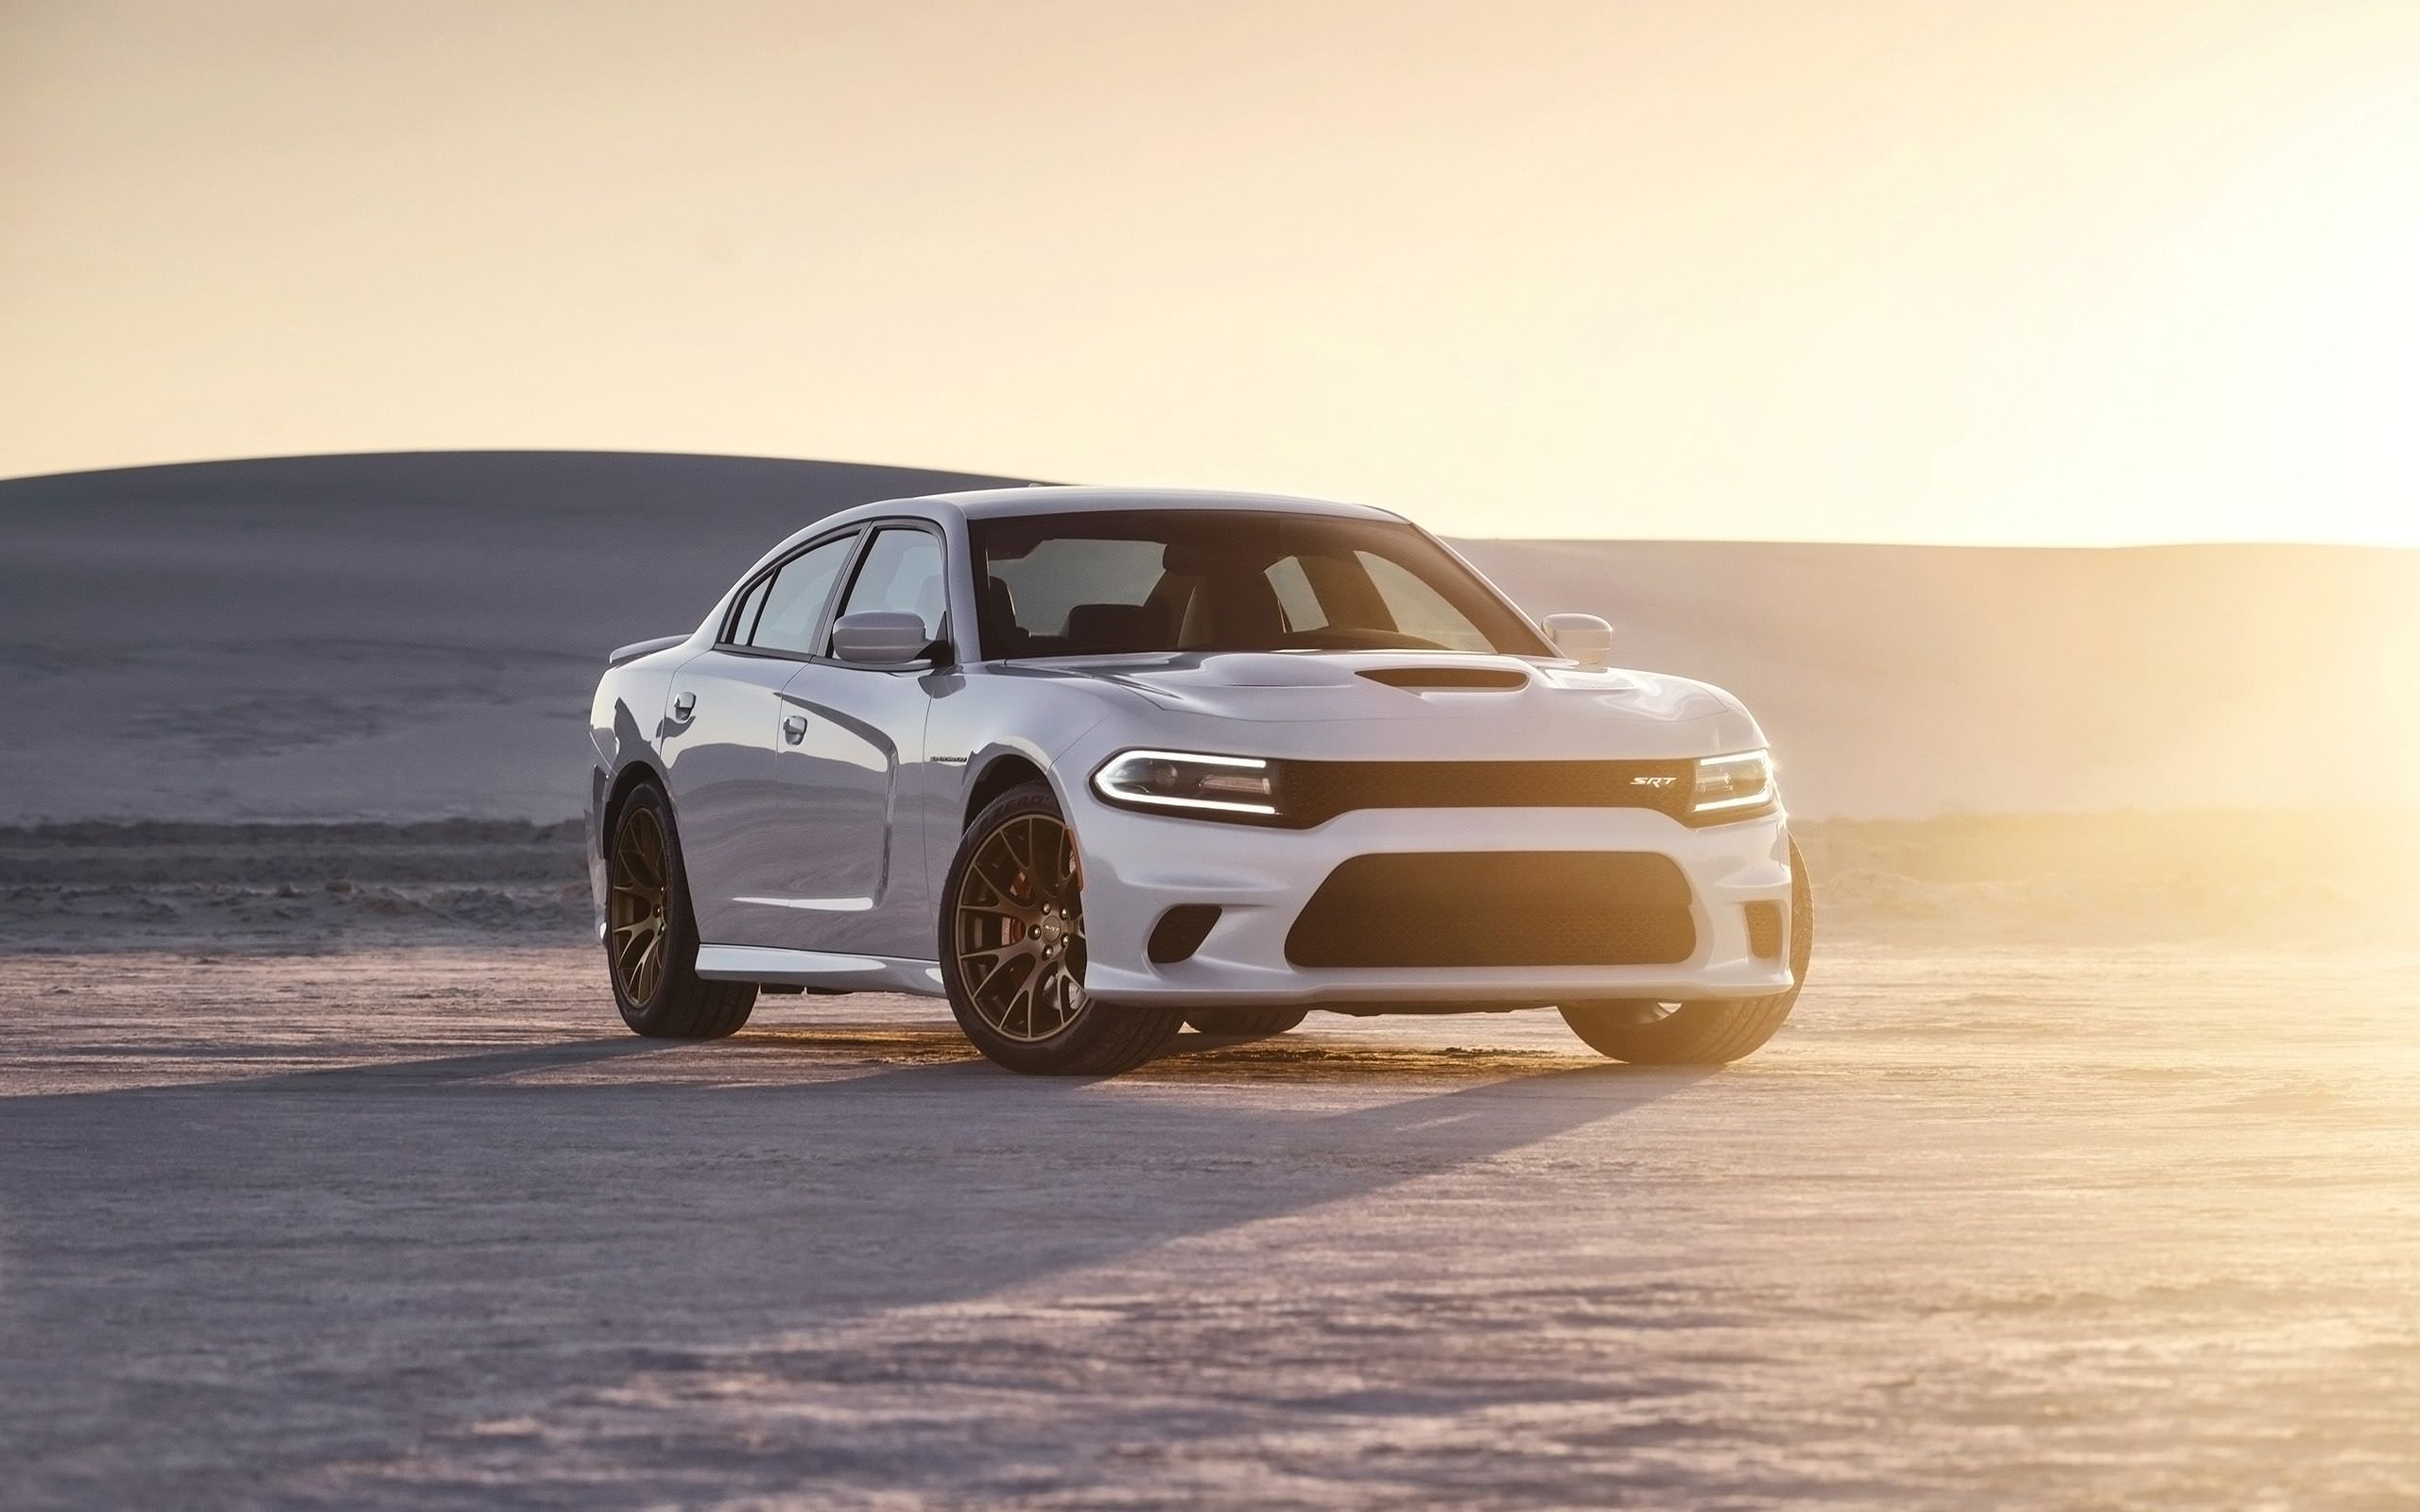 Black Dodge Charger Wallpapers  Wallpaper Cave